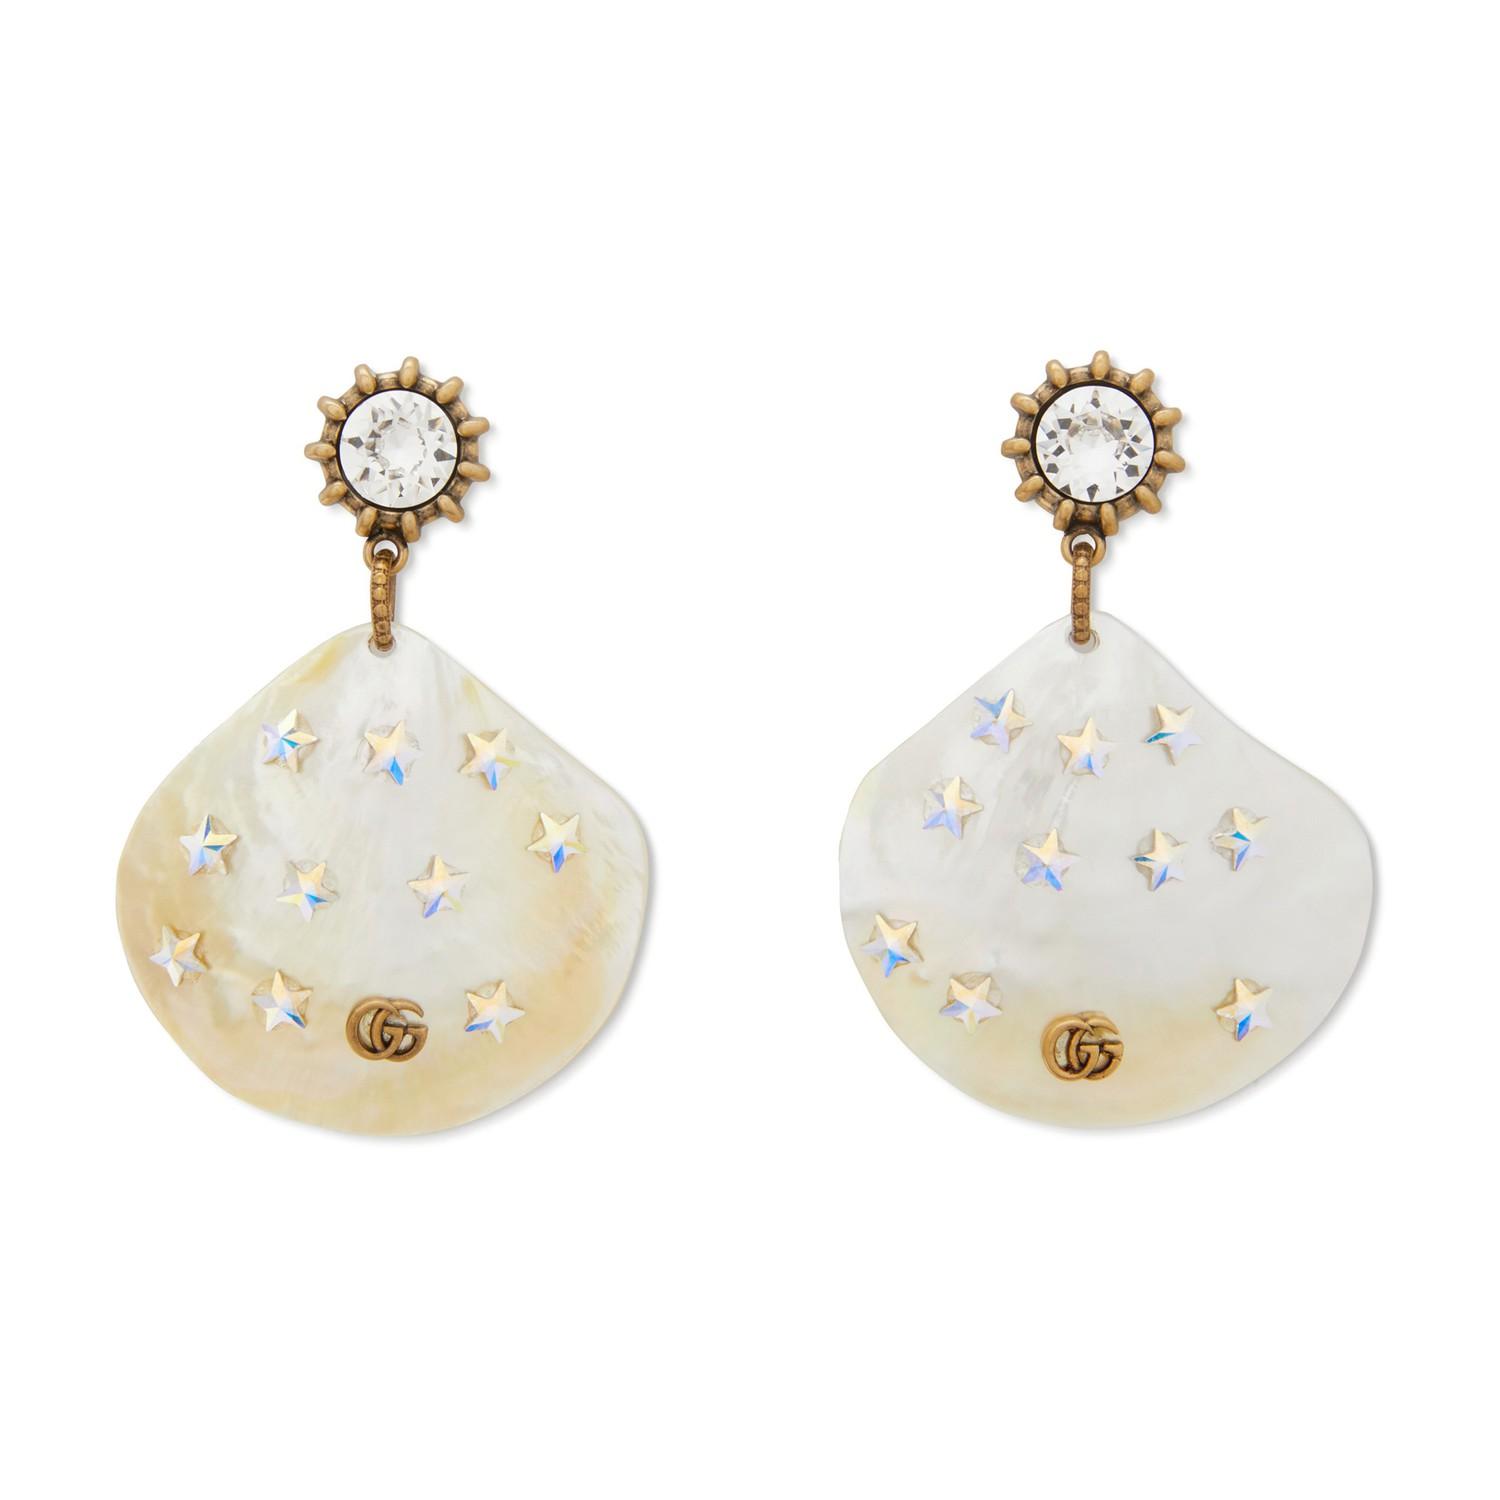 Gucci Shell Earrings in Mother of Pearl 